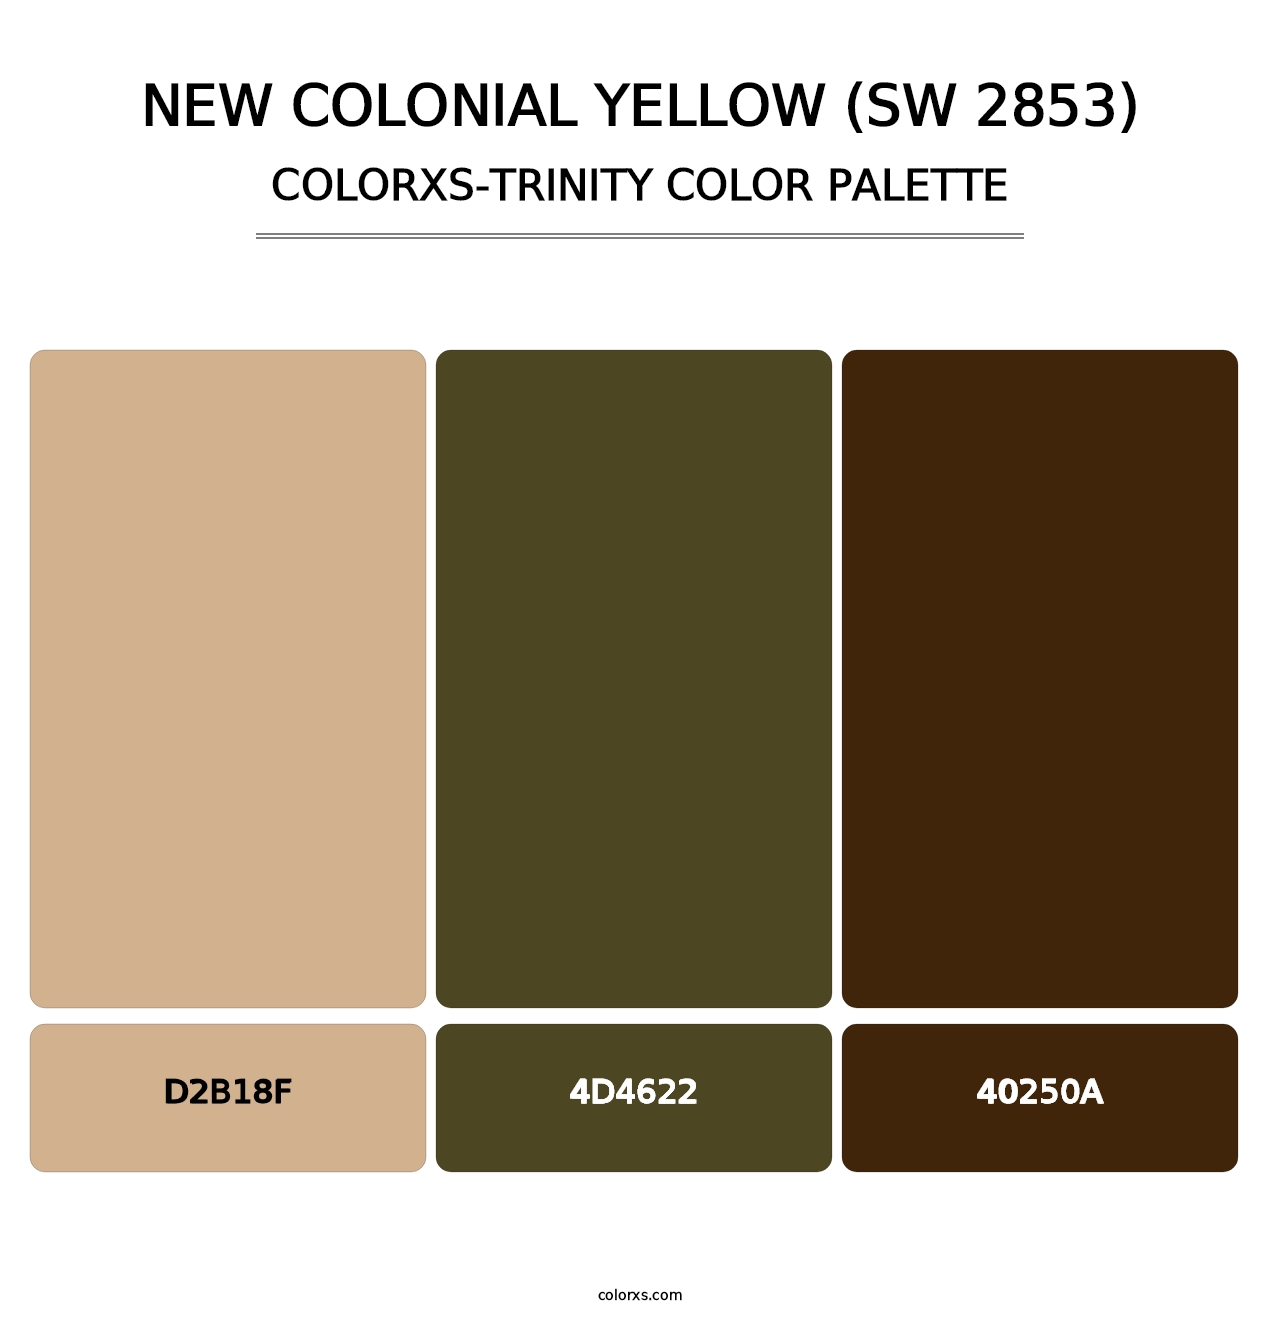 New Colonial Yellow (SW 2853) - Colorxs Trinity Palette